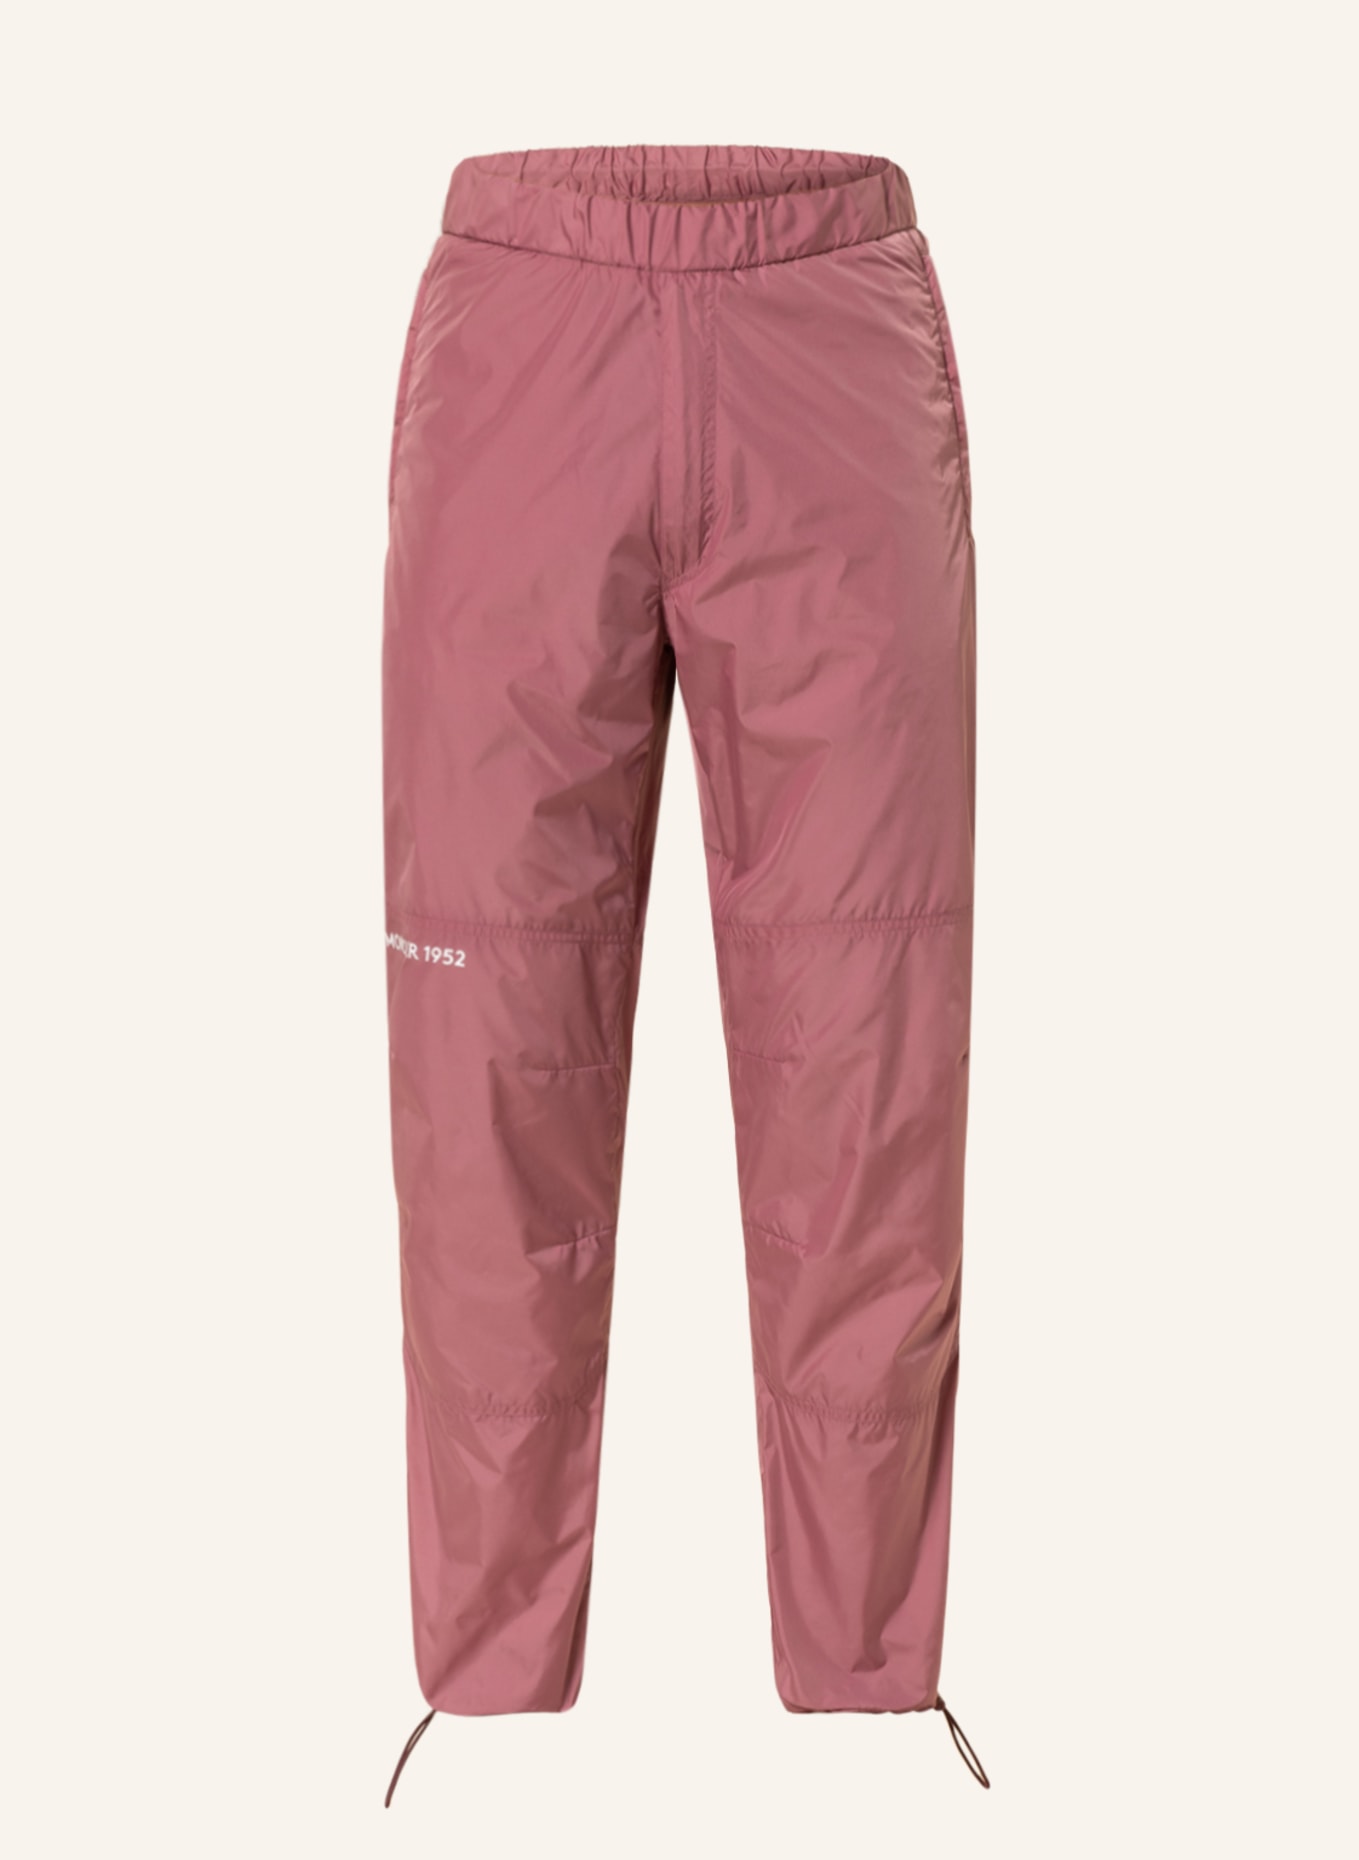 MONCLER GENIUS Trousers in jogger style , Color: DUSKY PINK (Image 1)